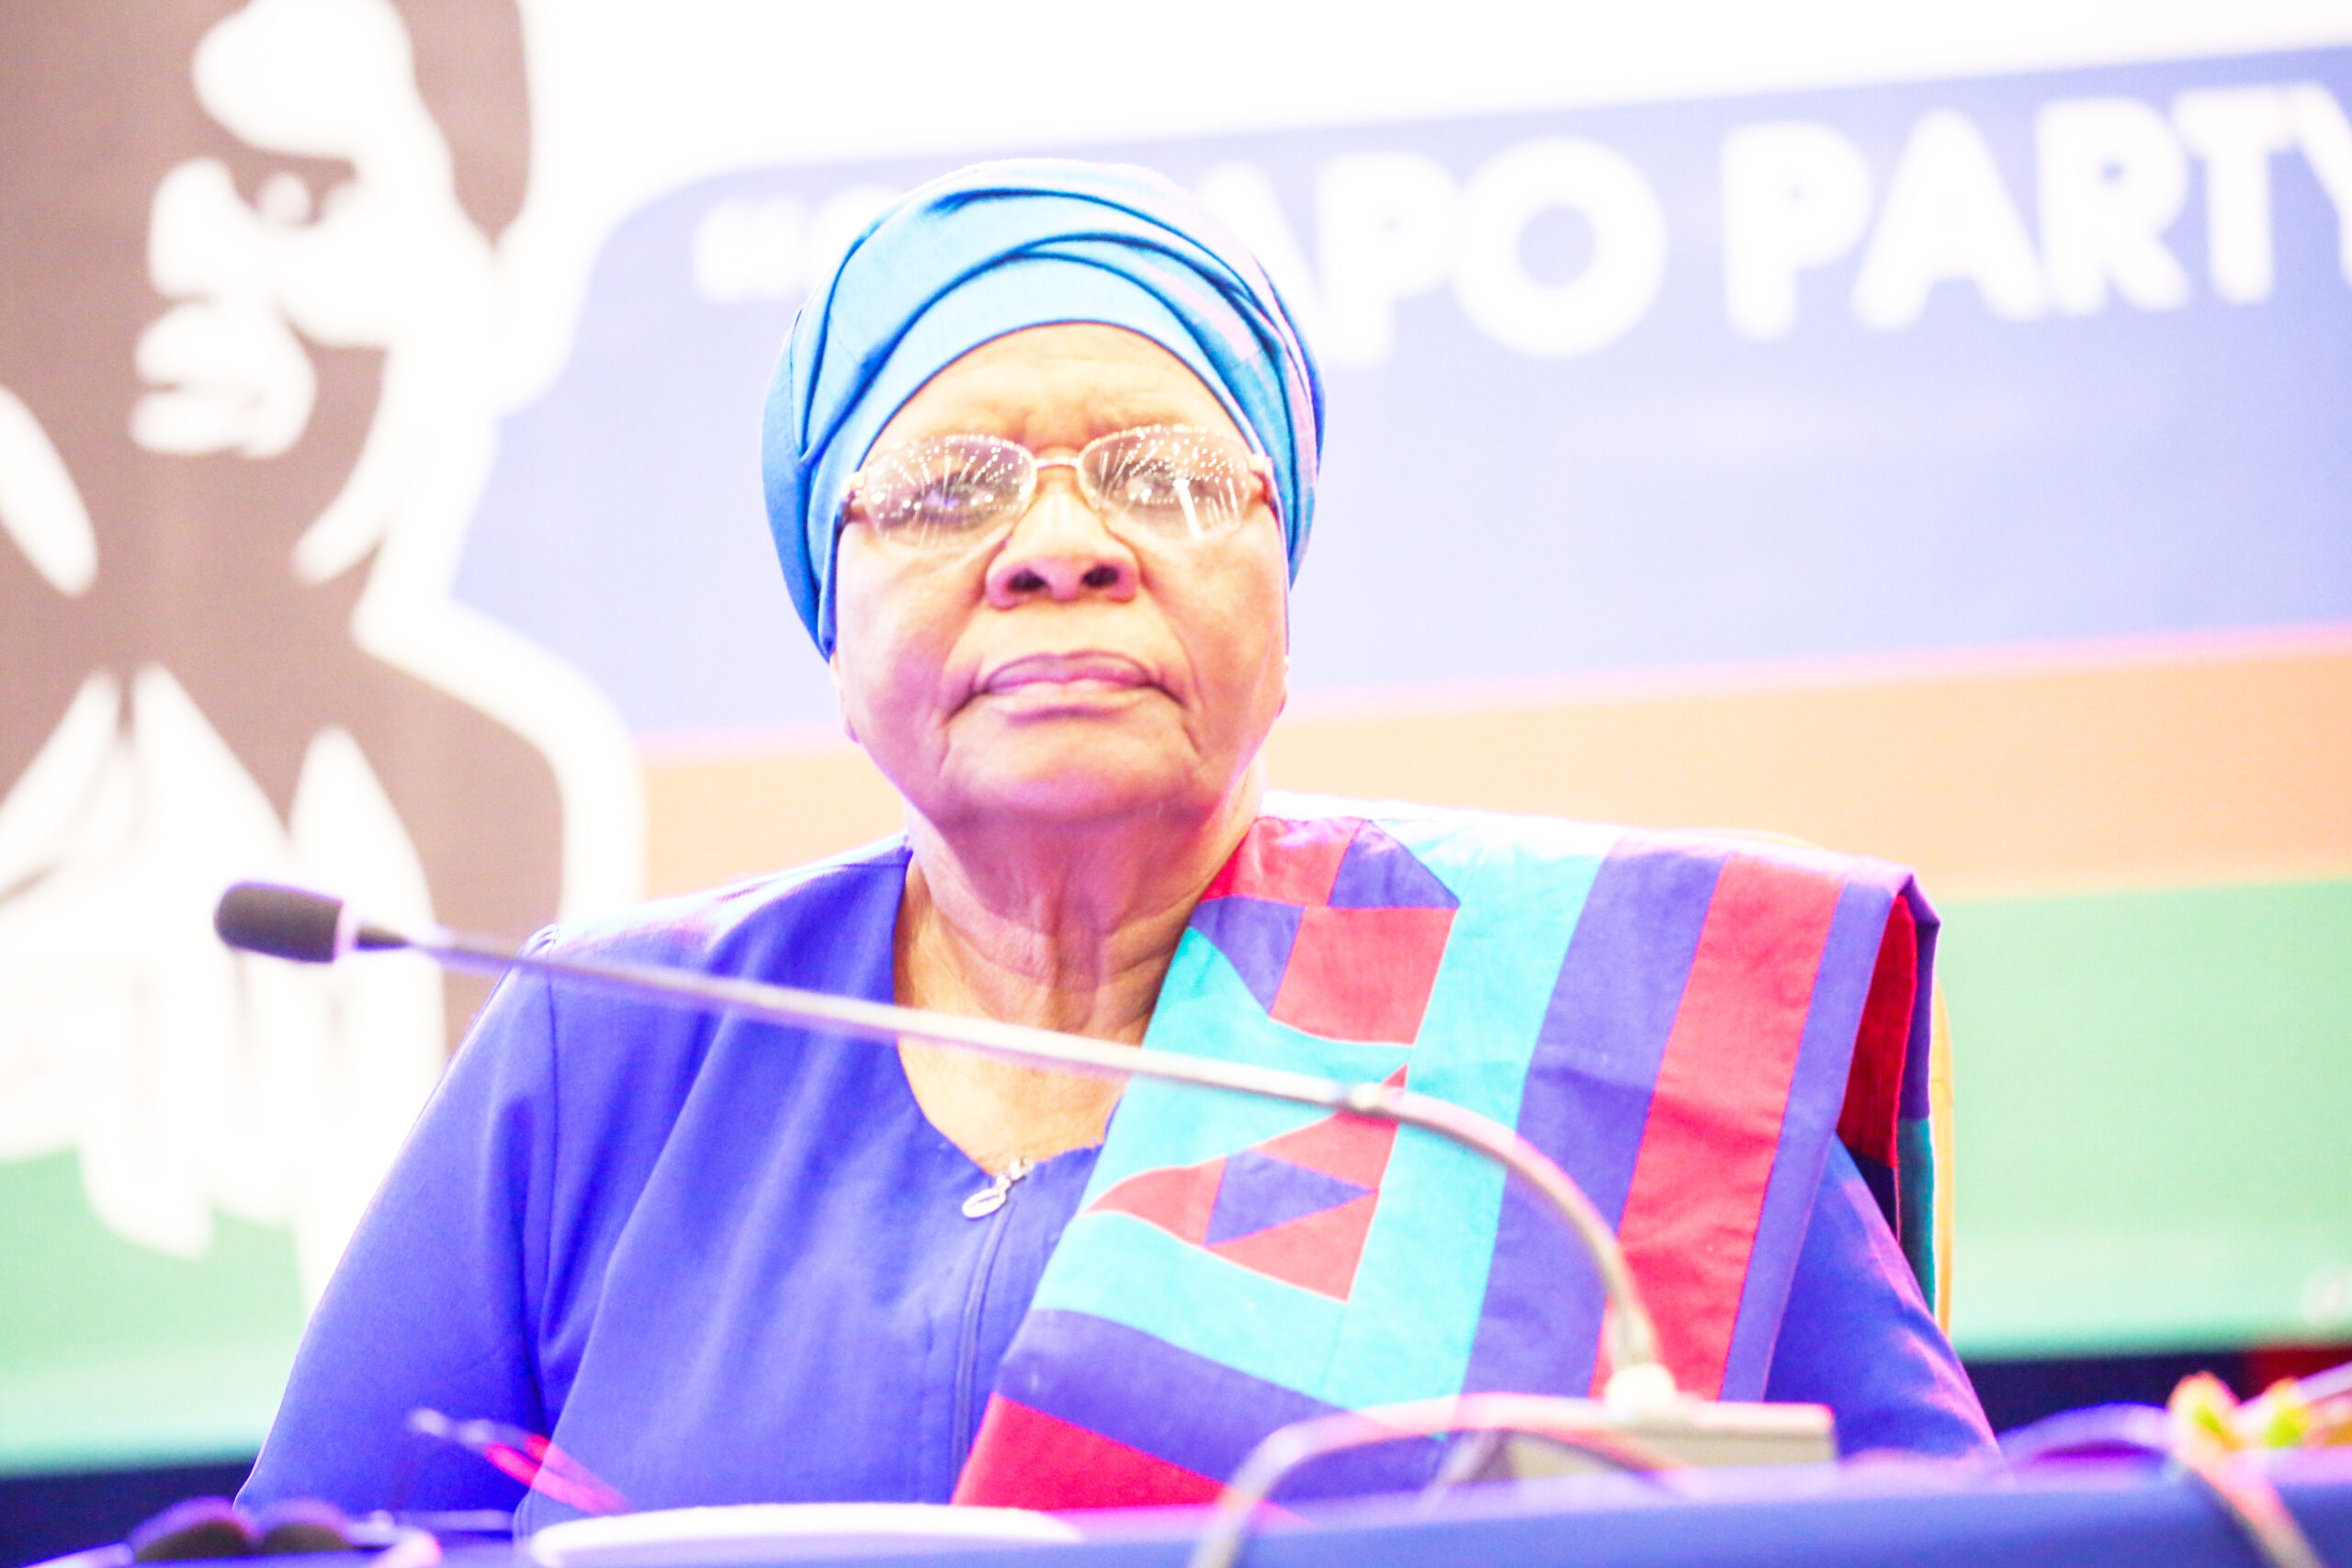 Corruption is our biggest enemy – Nandi-Ndaitwah - The Namibian